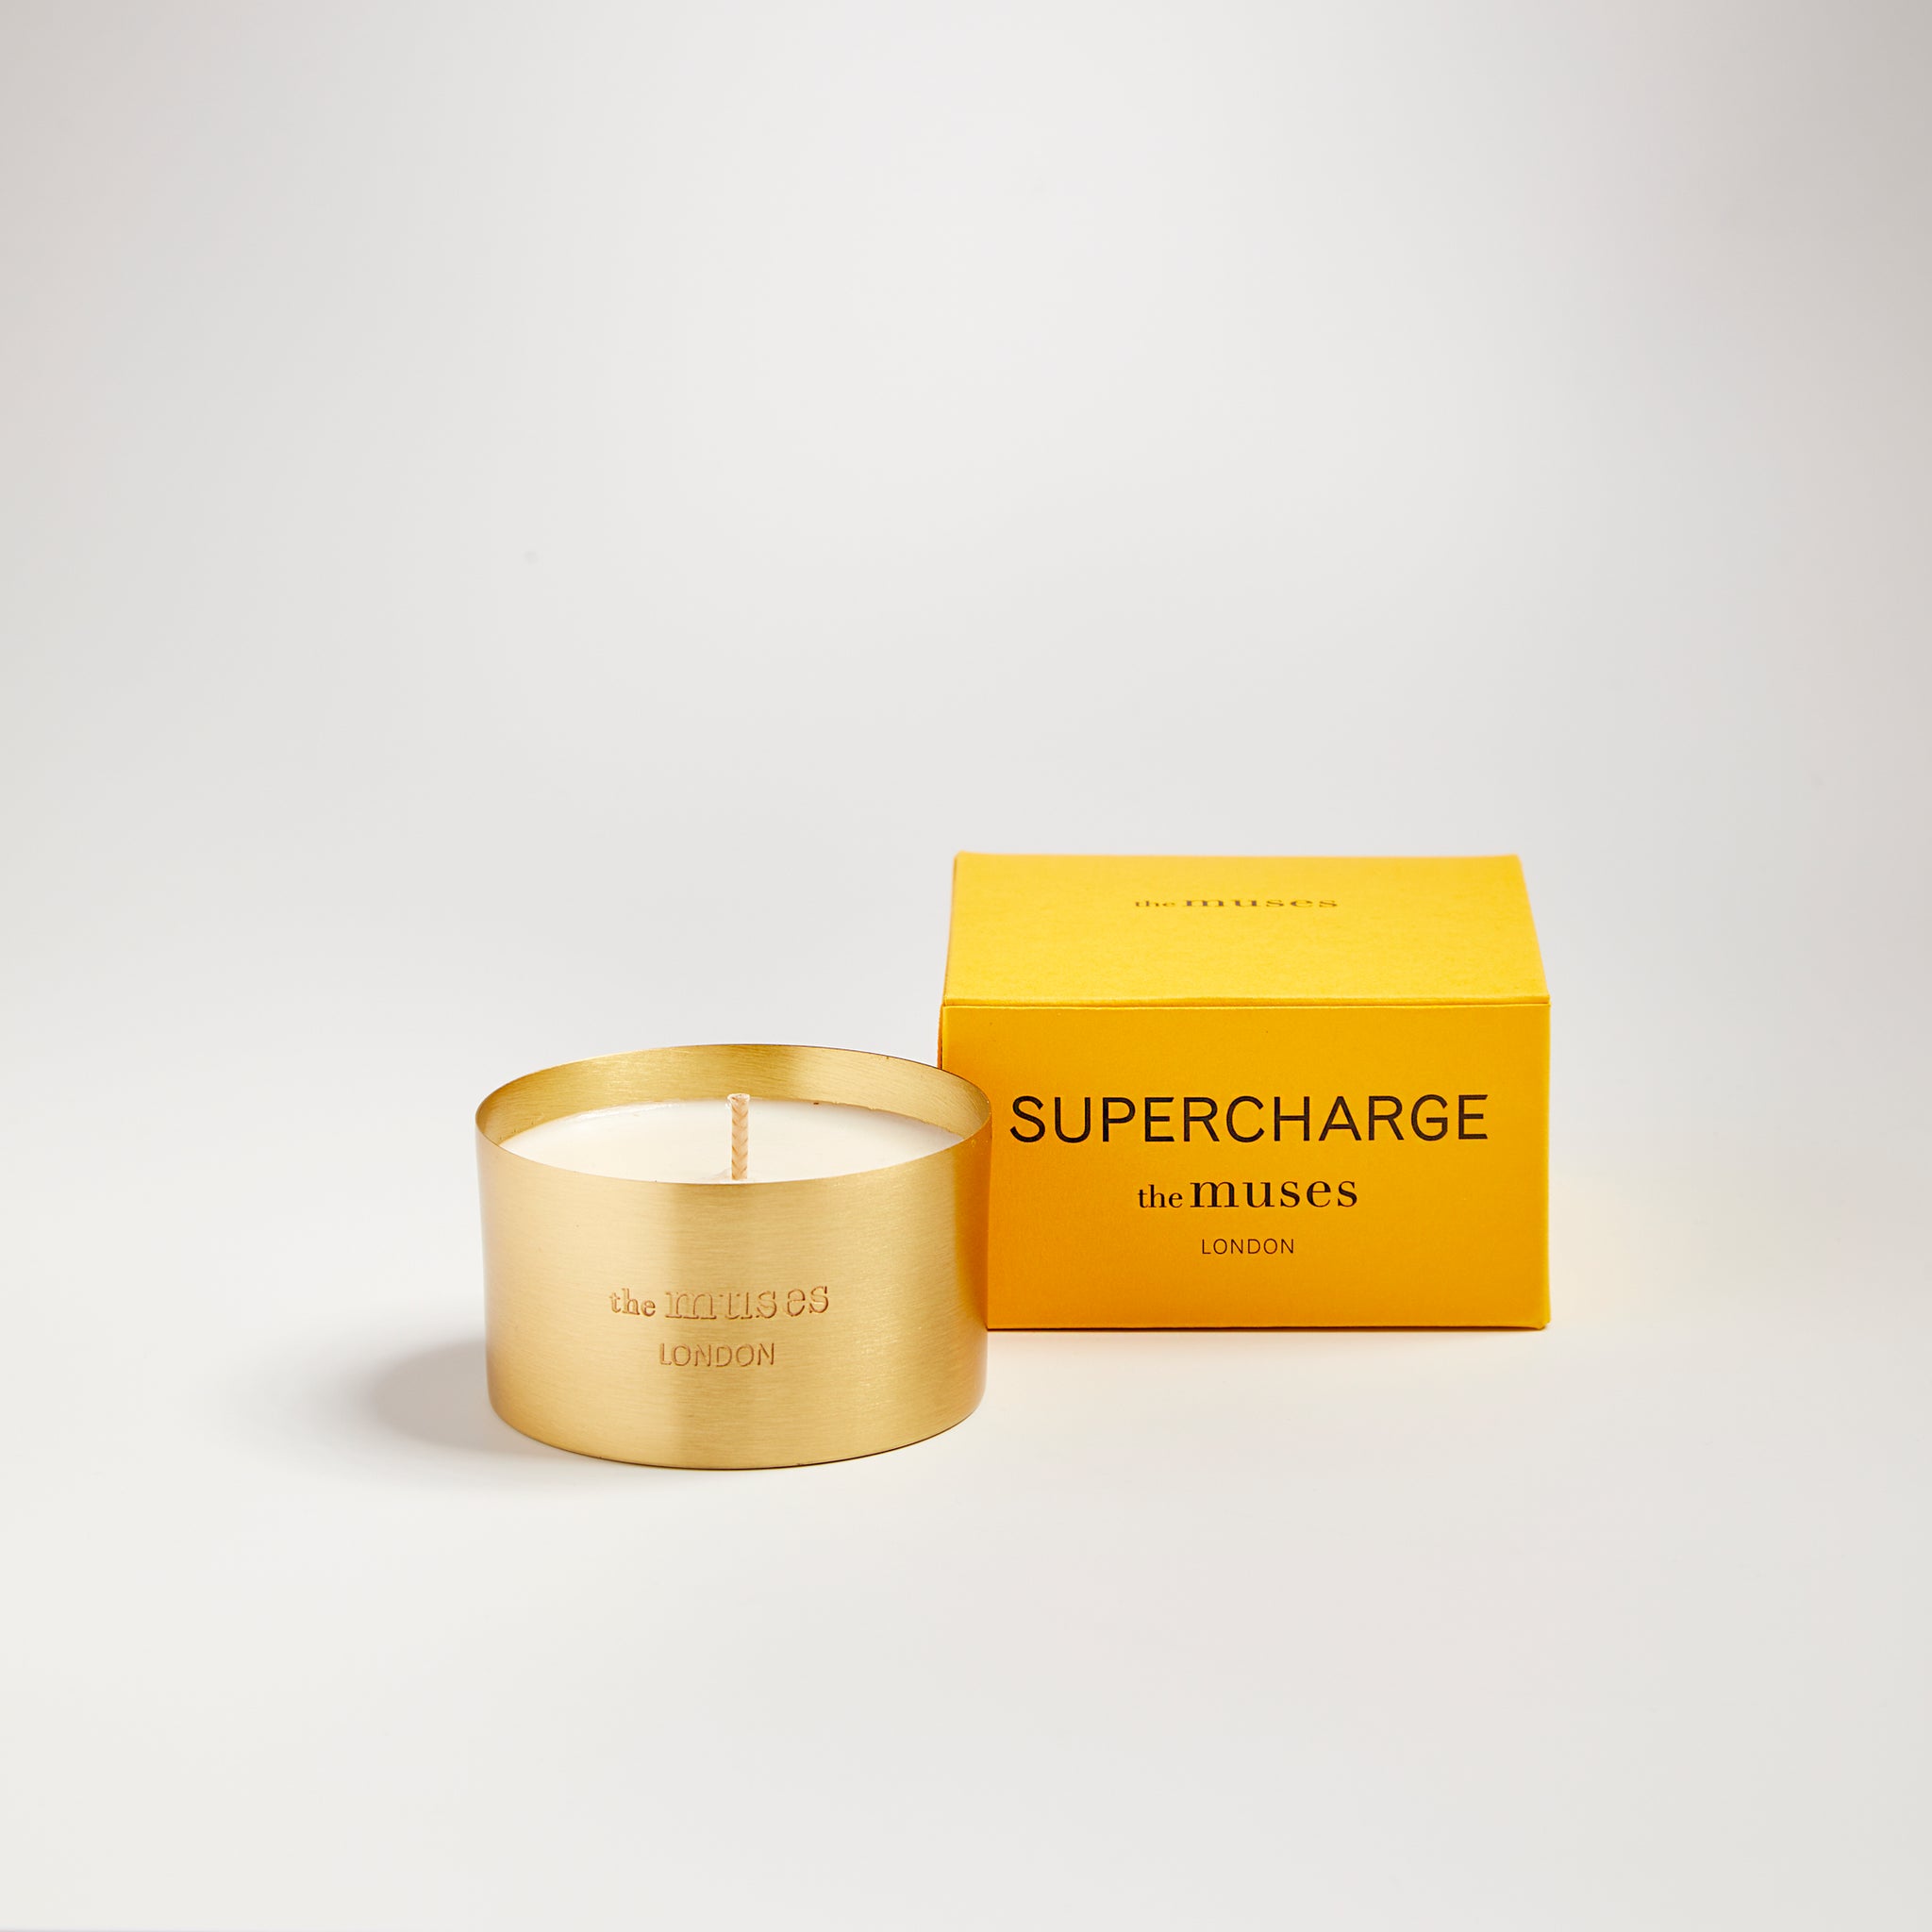 Supercharge scented100% natural wax candle 110g in pure brass container next to bright yellow candle box with closed lid. Front.